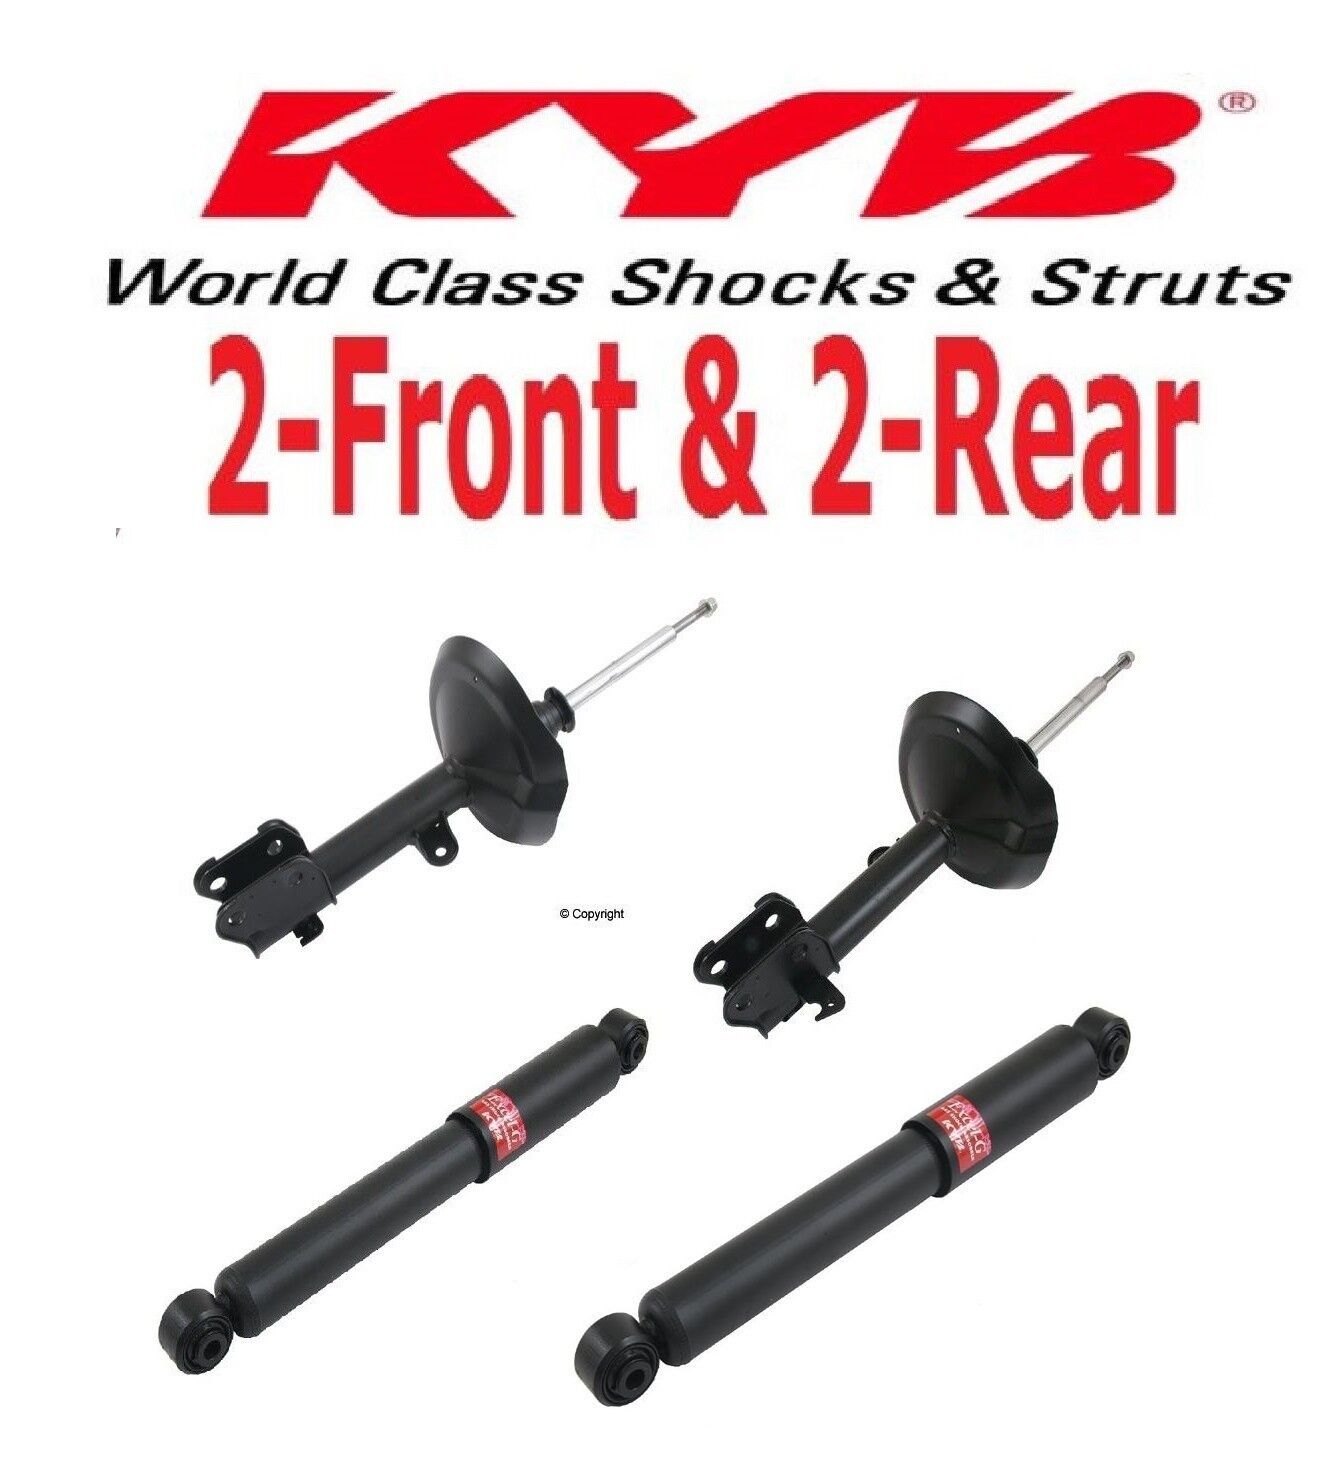 4- KYB Excel-G Shocks/Struts 2-Front & 2-Rear for Acura MDX 03-06